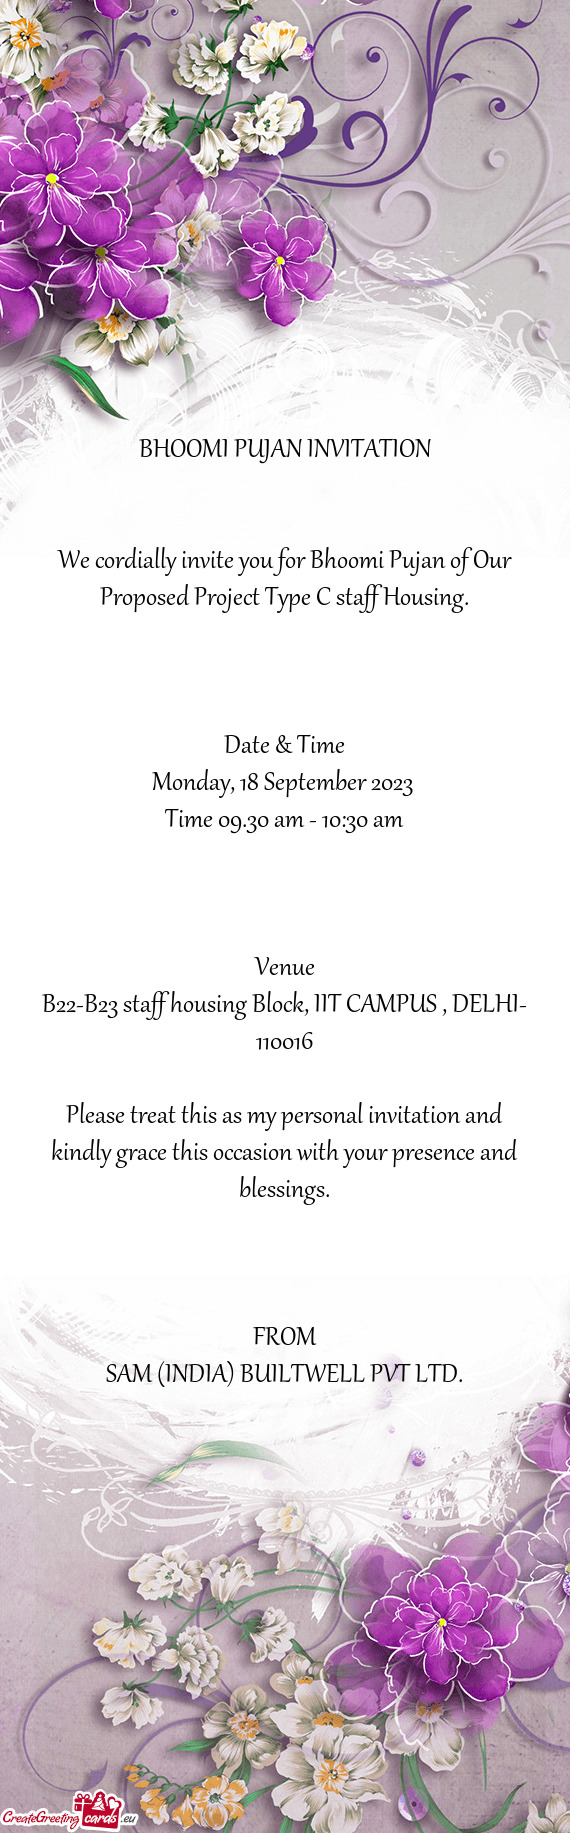 We cordially invite you for Bhoomi Pujan of Our Proposed Project Type C staff Housing